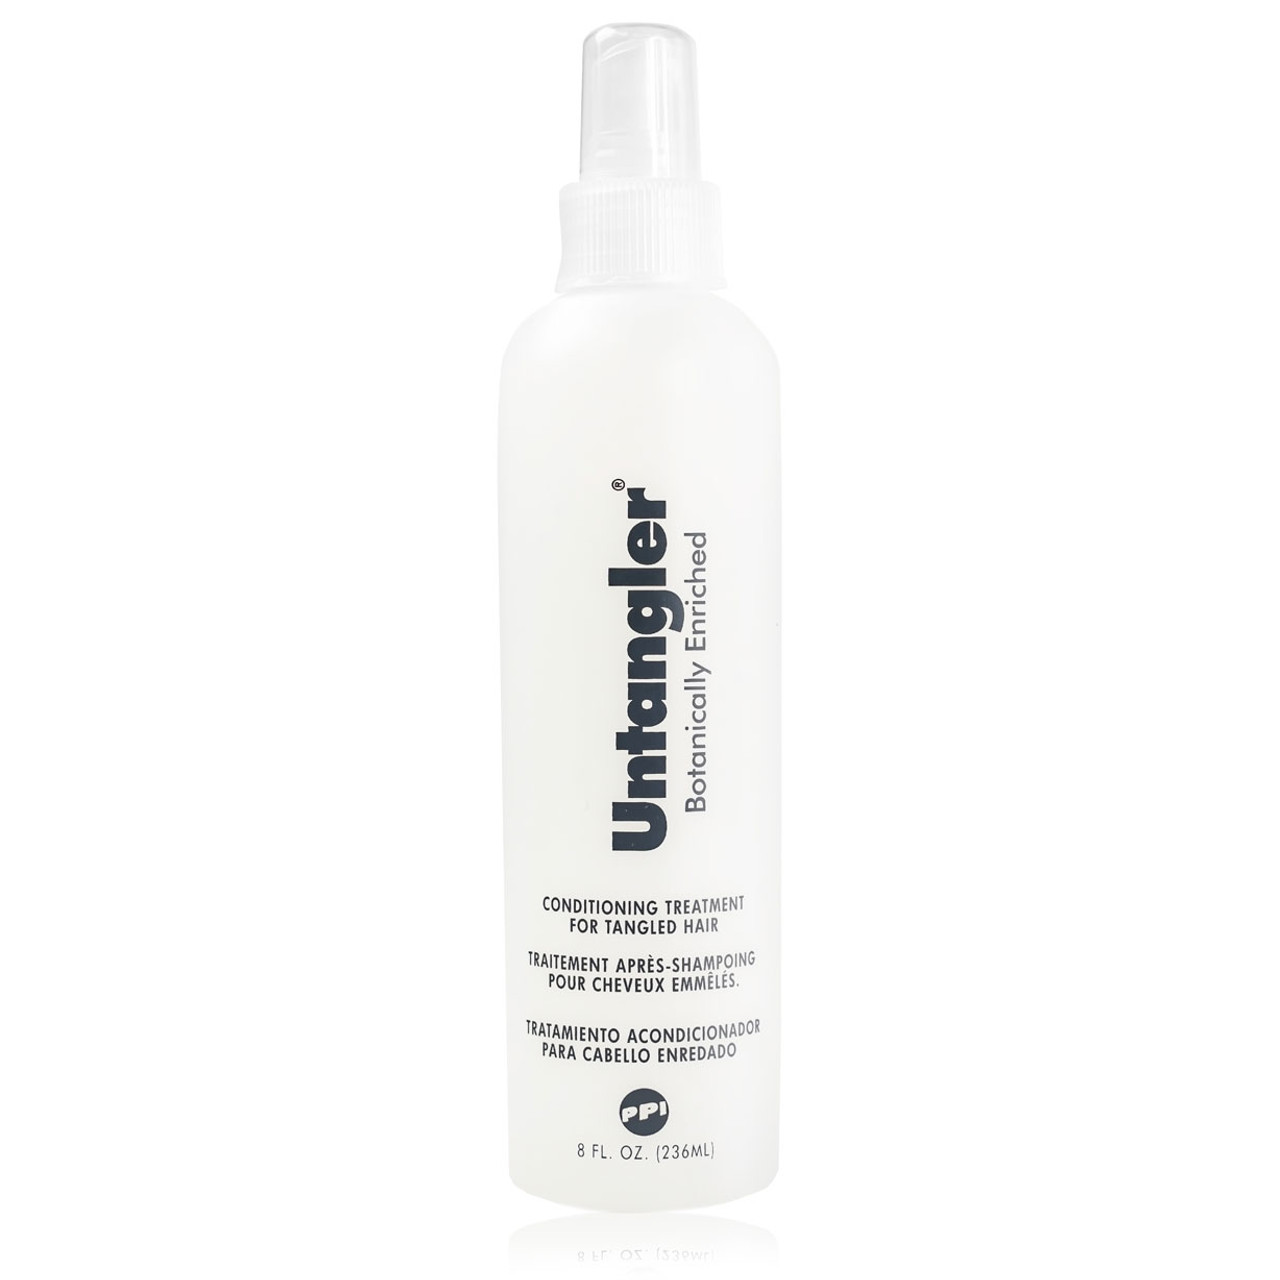 PPI Untangler 8 oz. Hairpiece Styling Product - Click Image to Close